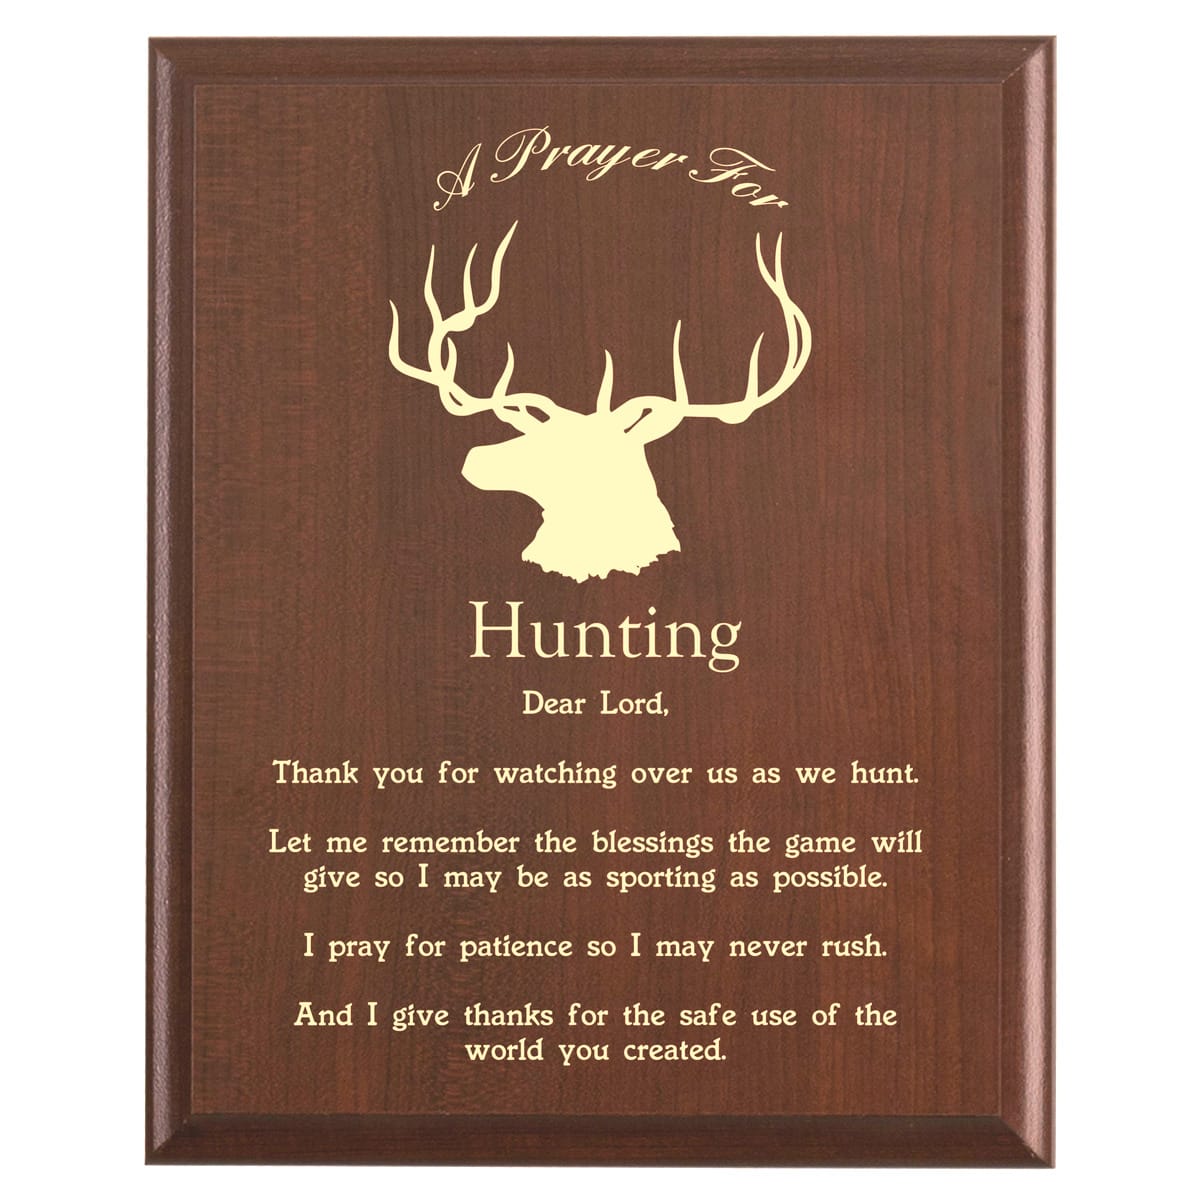 Plaque photo: Hunters Prayer Plaque design with free personalization. Wood style finish with customized text.